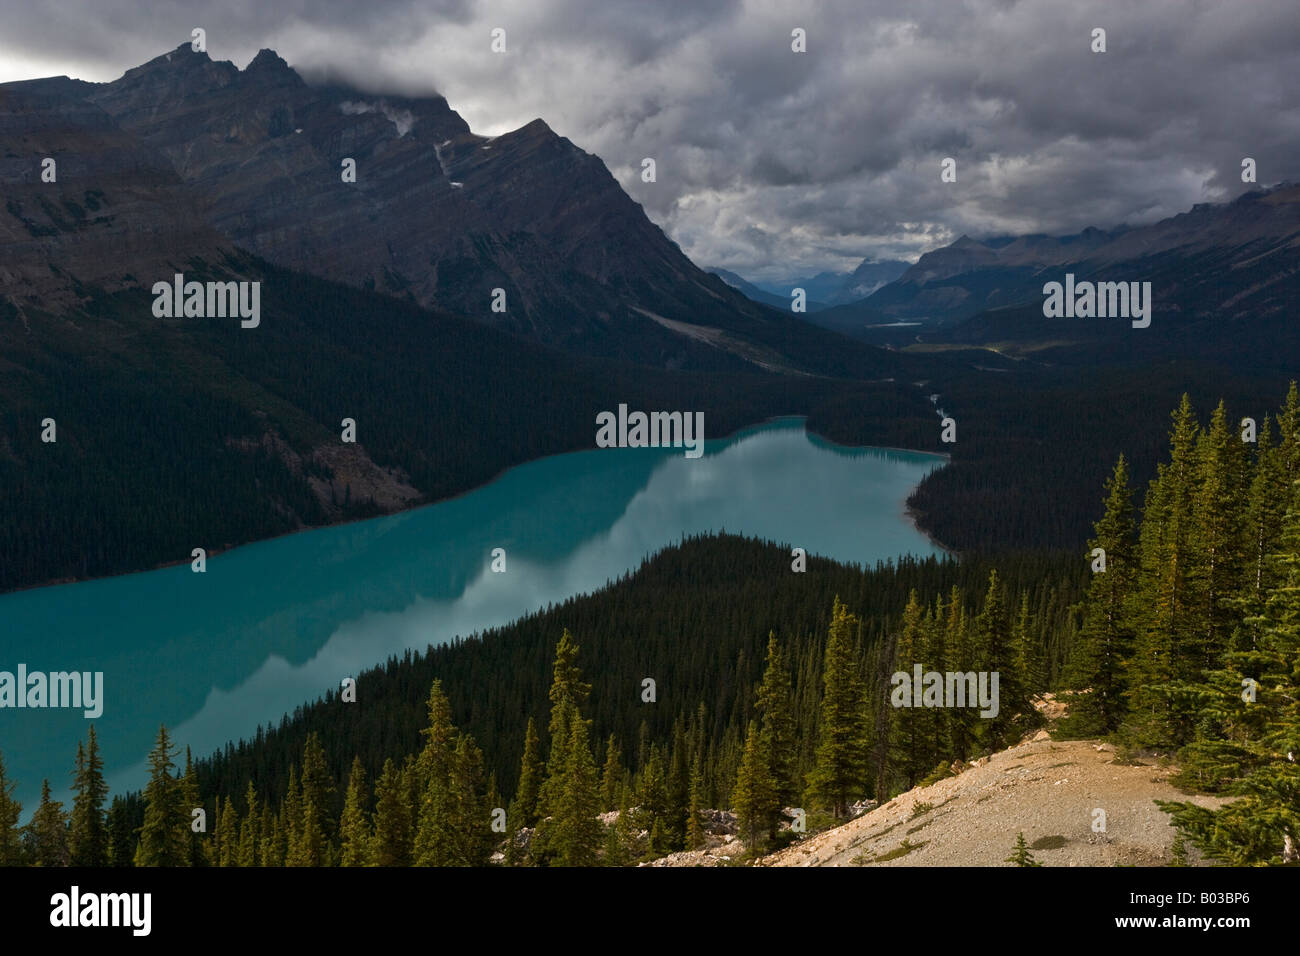 The fresh turquoise waters of Peyto Lake in the sunlit alpine forests of the Canadian Rockies Stock Photo